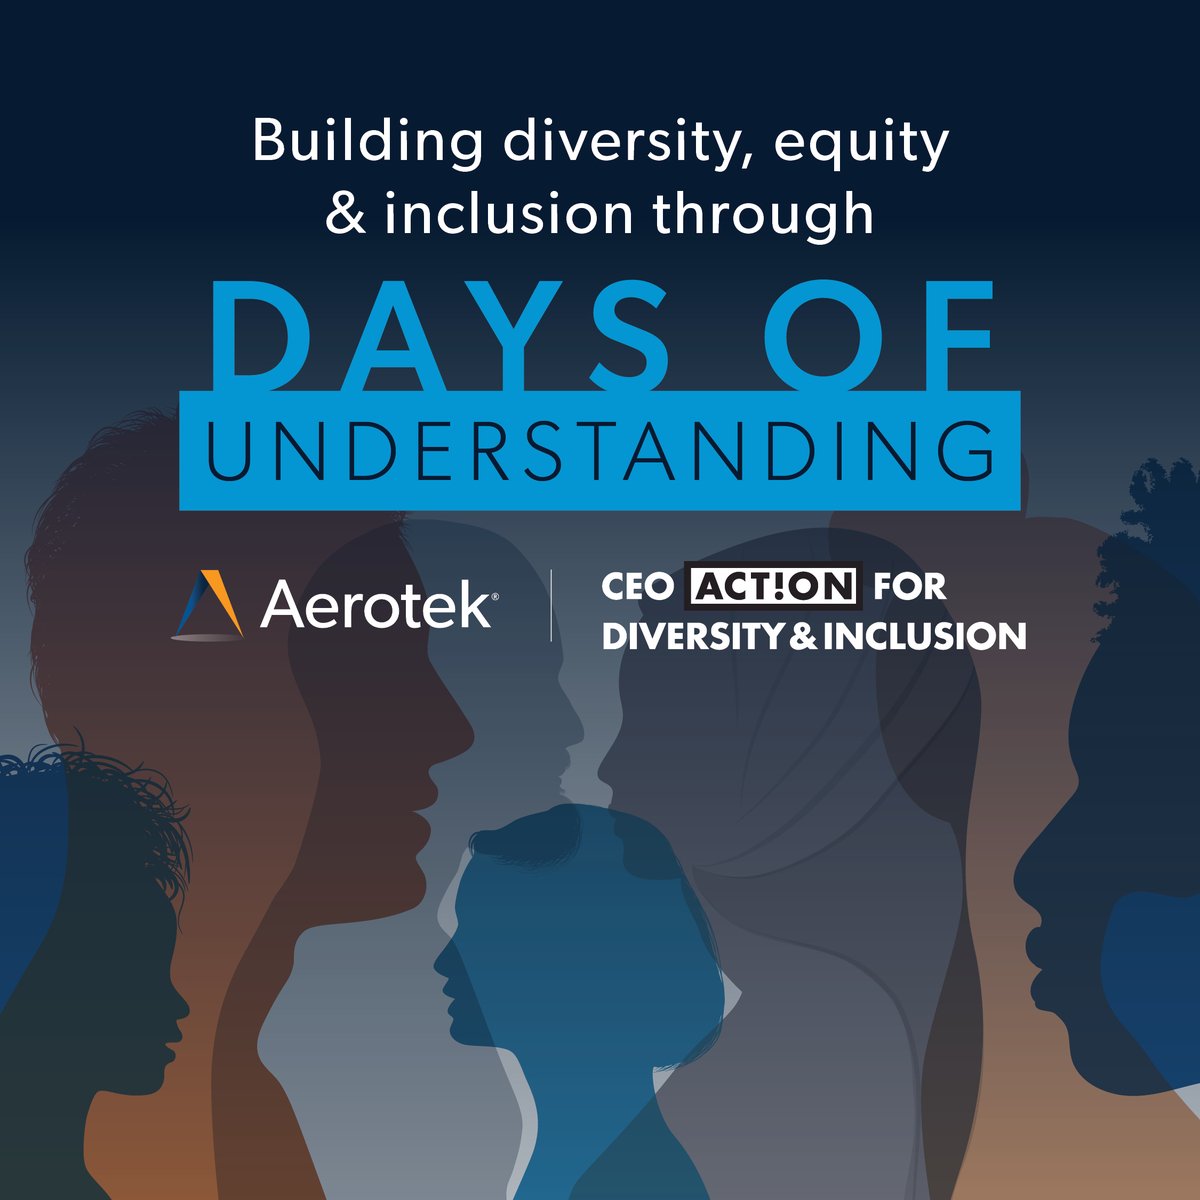 Today, we start our first of four Days of Understanding, providing an opportunity for our internal employees to have candid conversations around diversity, equity & inclusion. We're proud to join thousands of organizations as we participate in @CEOAction's Days of Understanding.